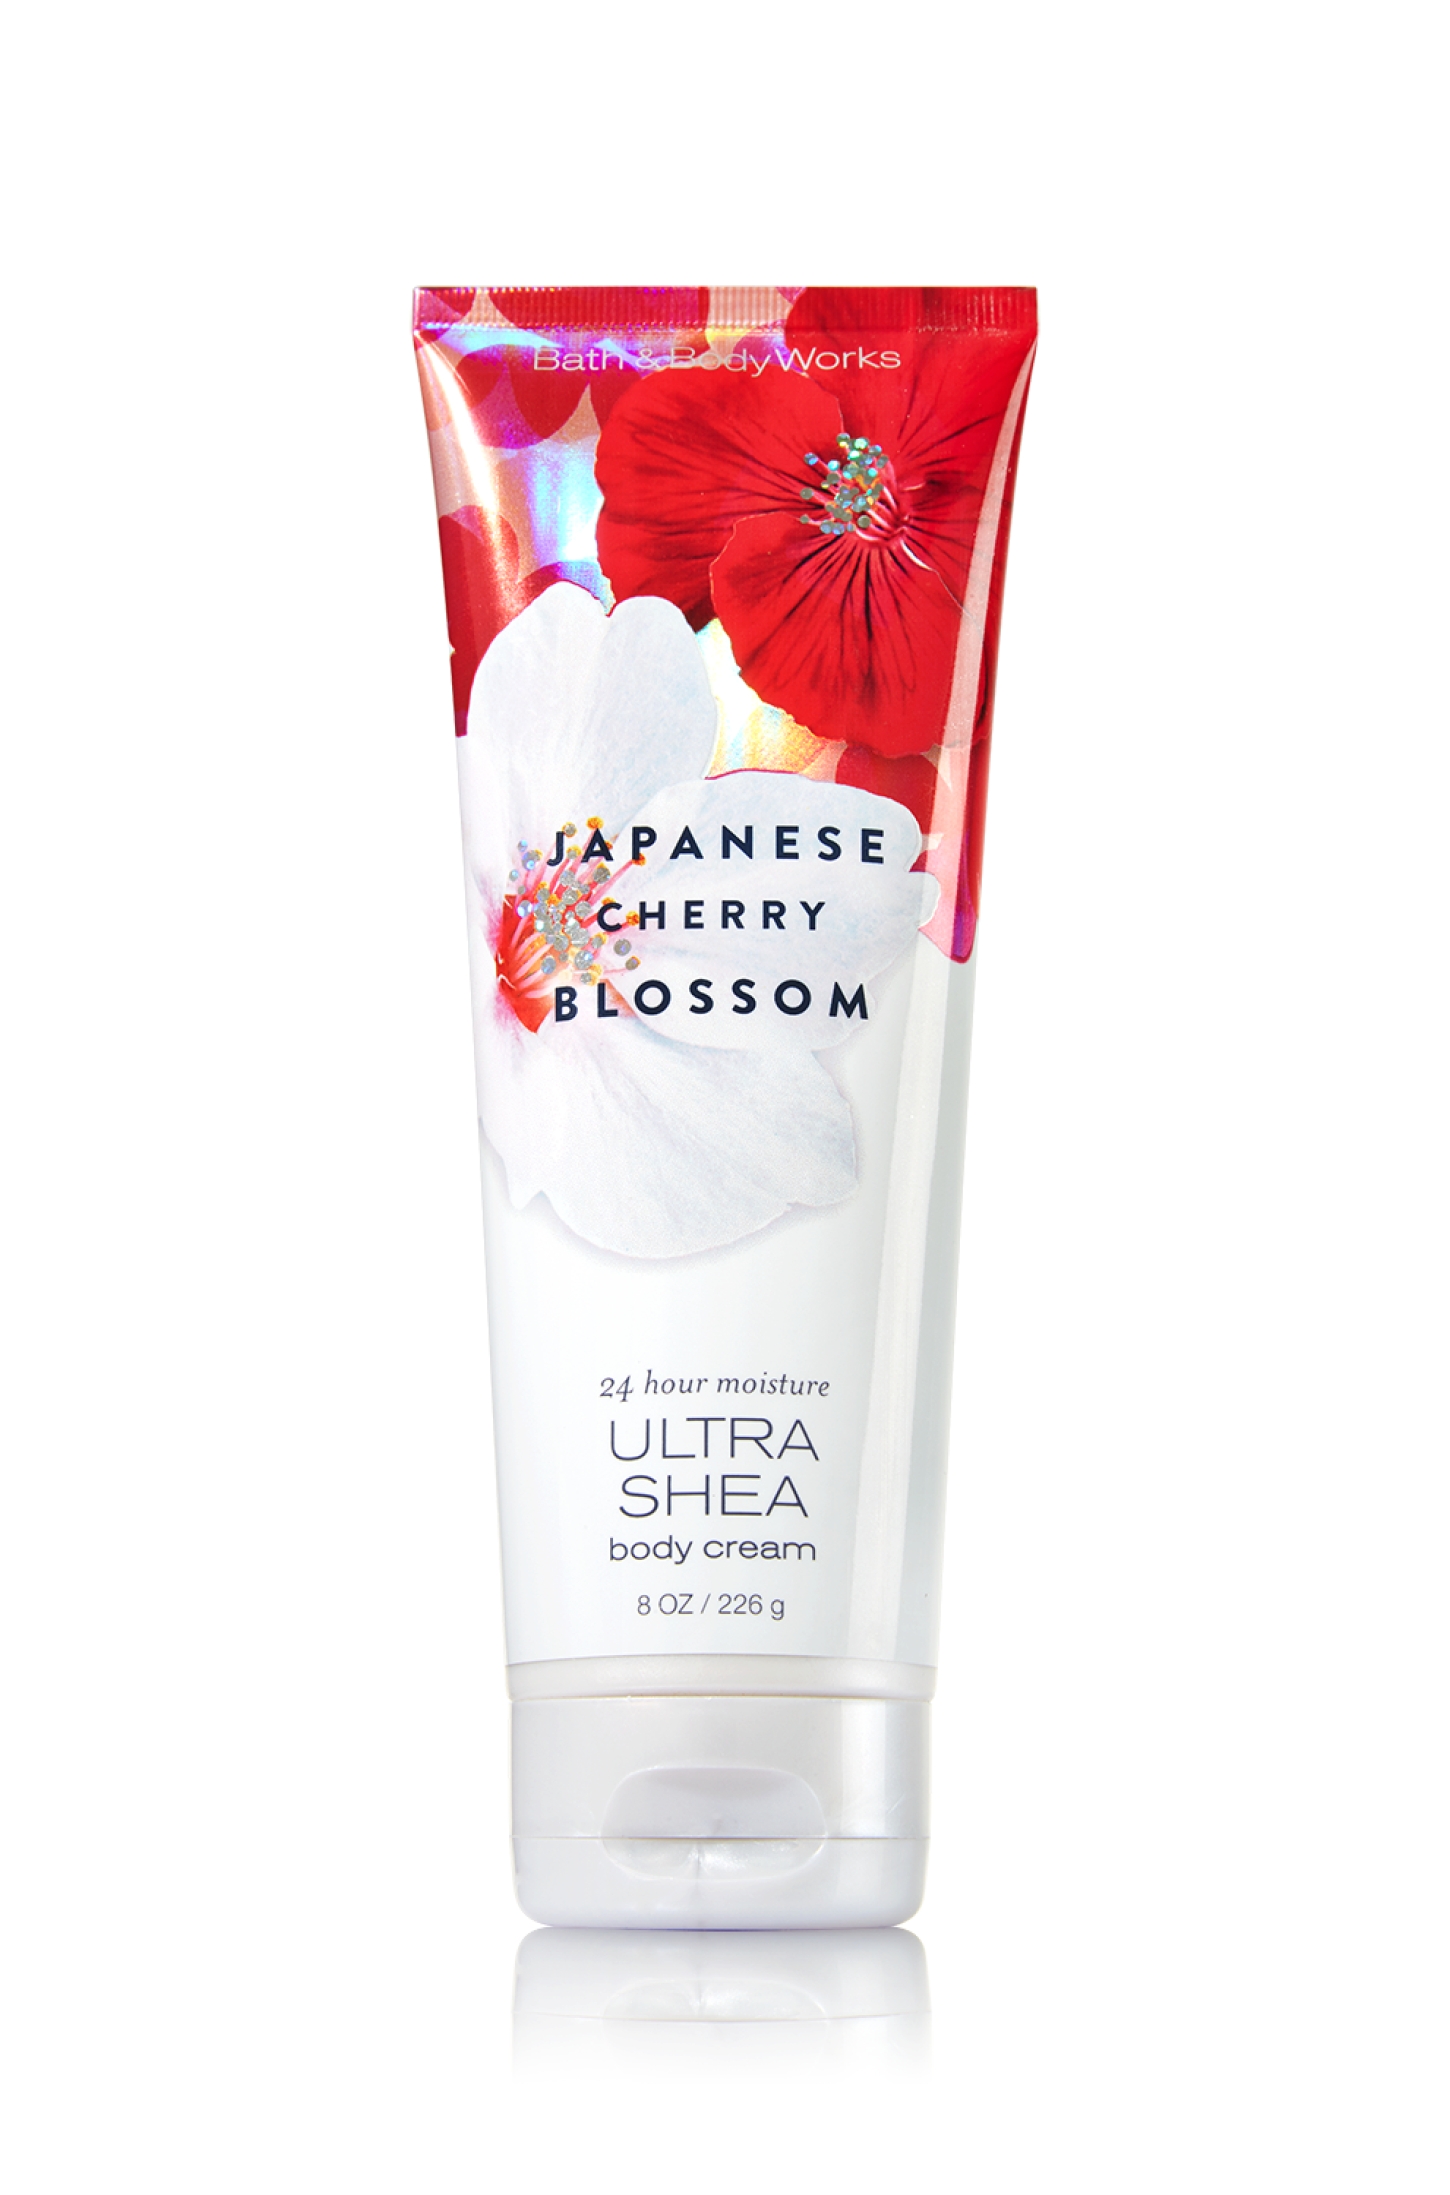 Bath and Body Works has a line of Japanese Cherry Blossom scented products. (Photo: Bath and Body Works)